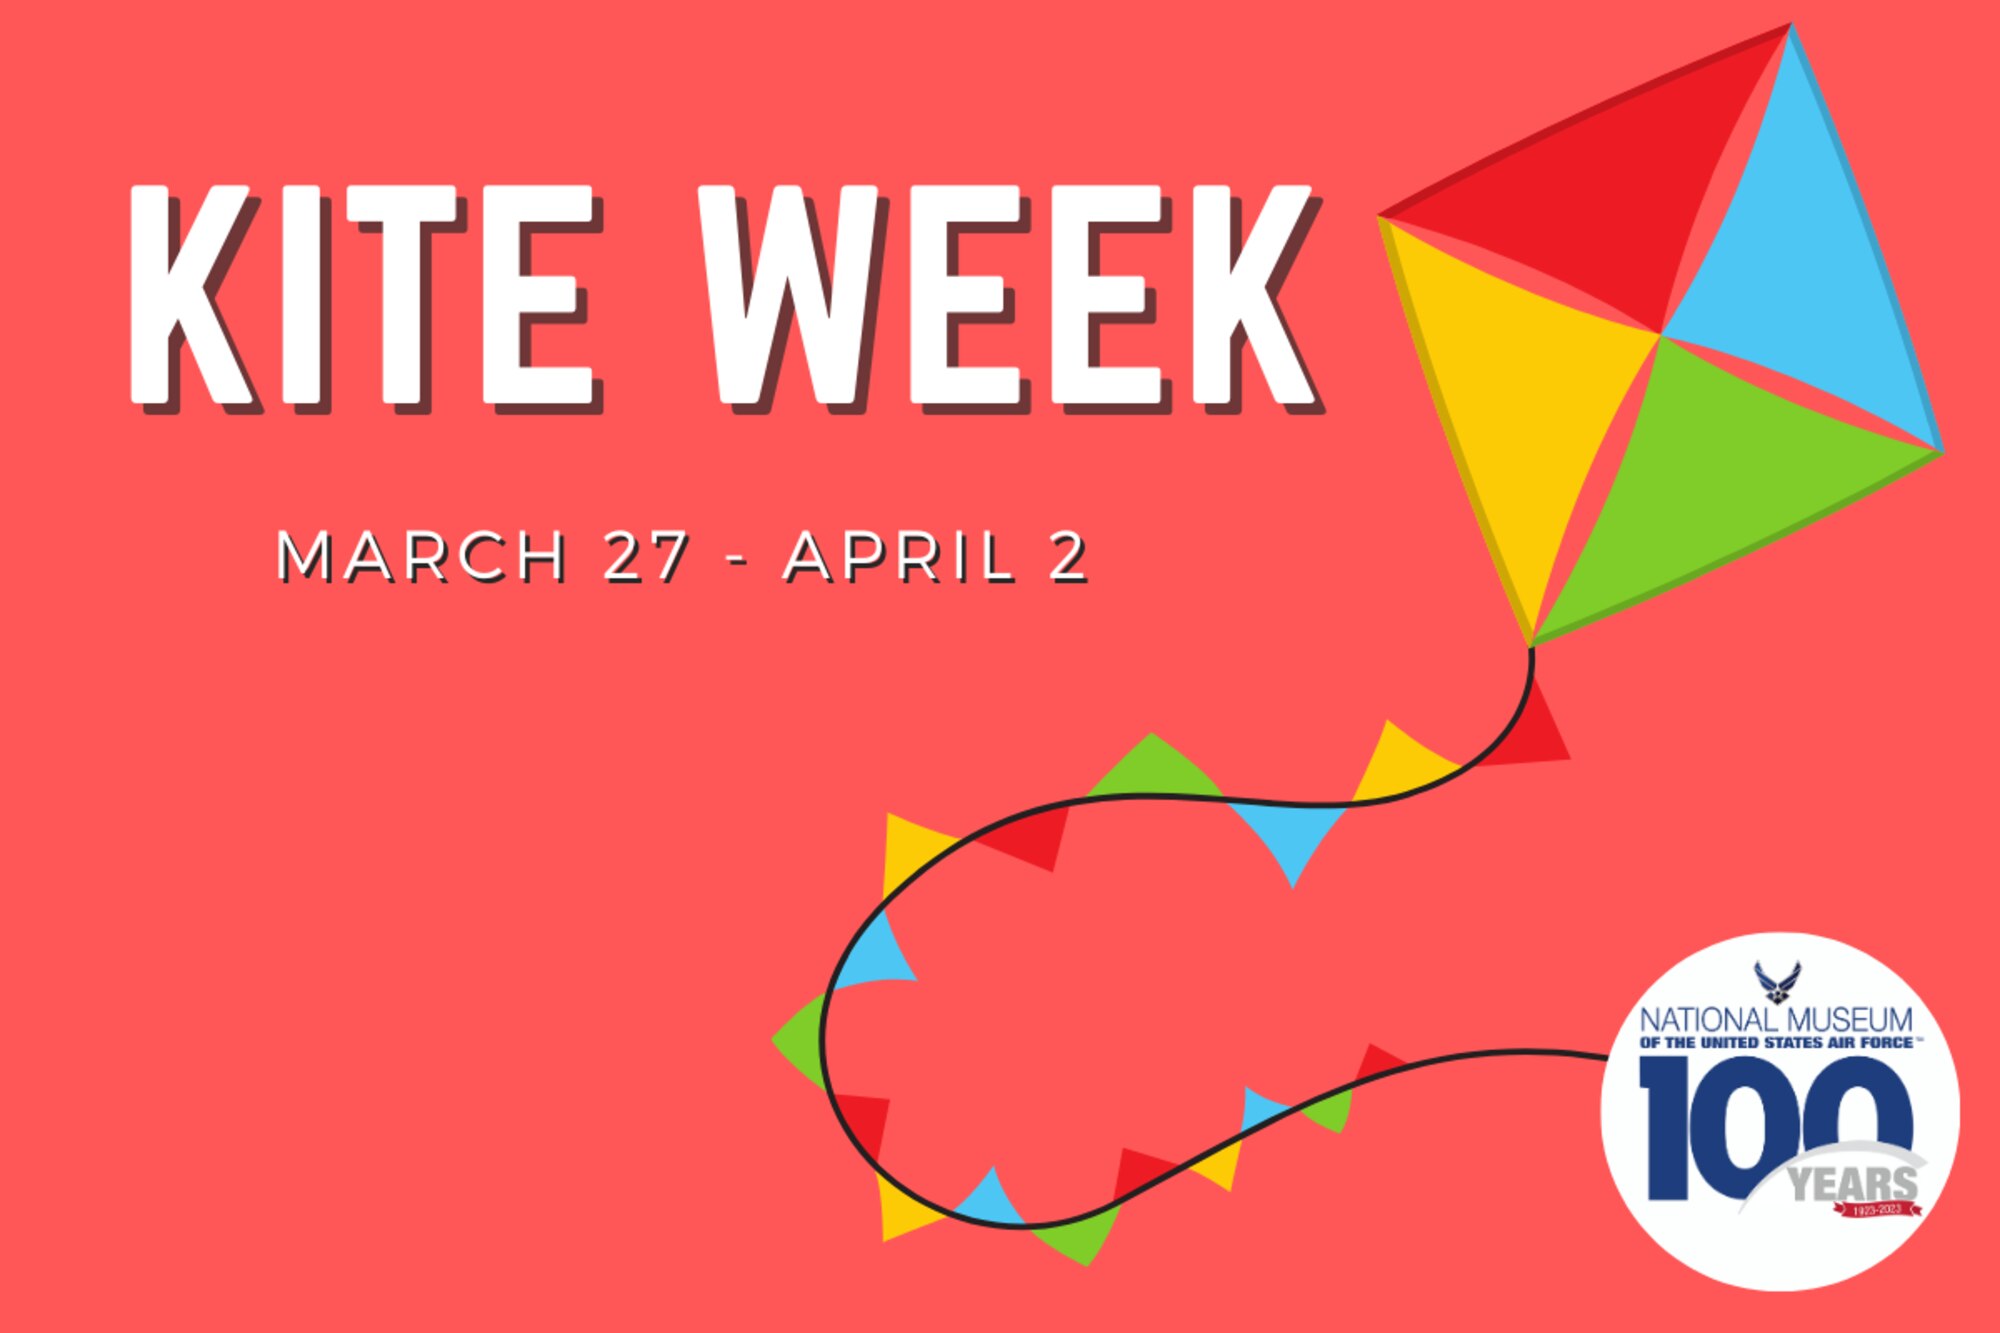 Image with a  multi-colored kite and Kite Week, March 27- april 2